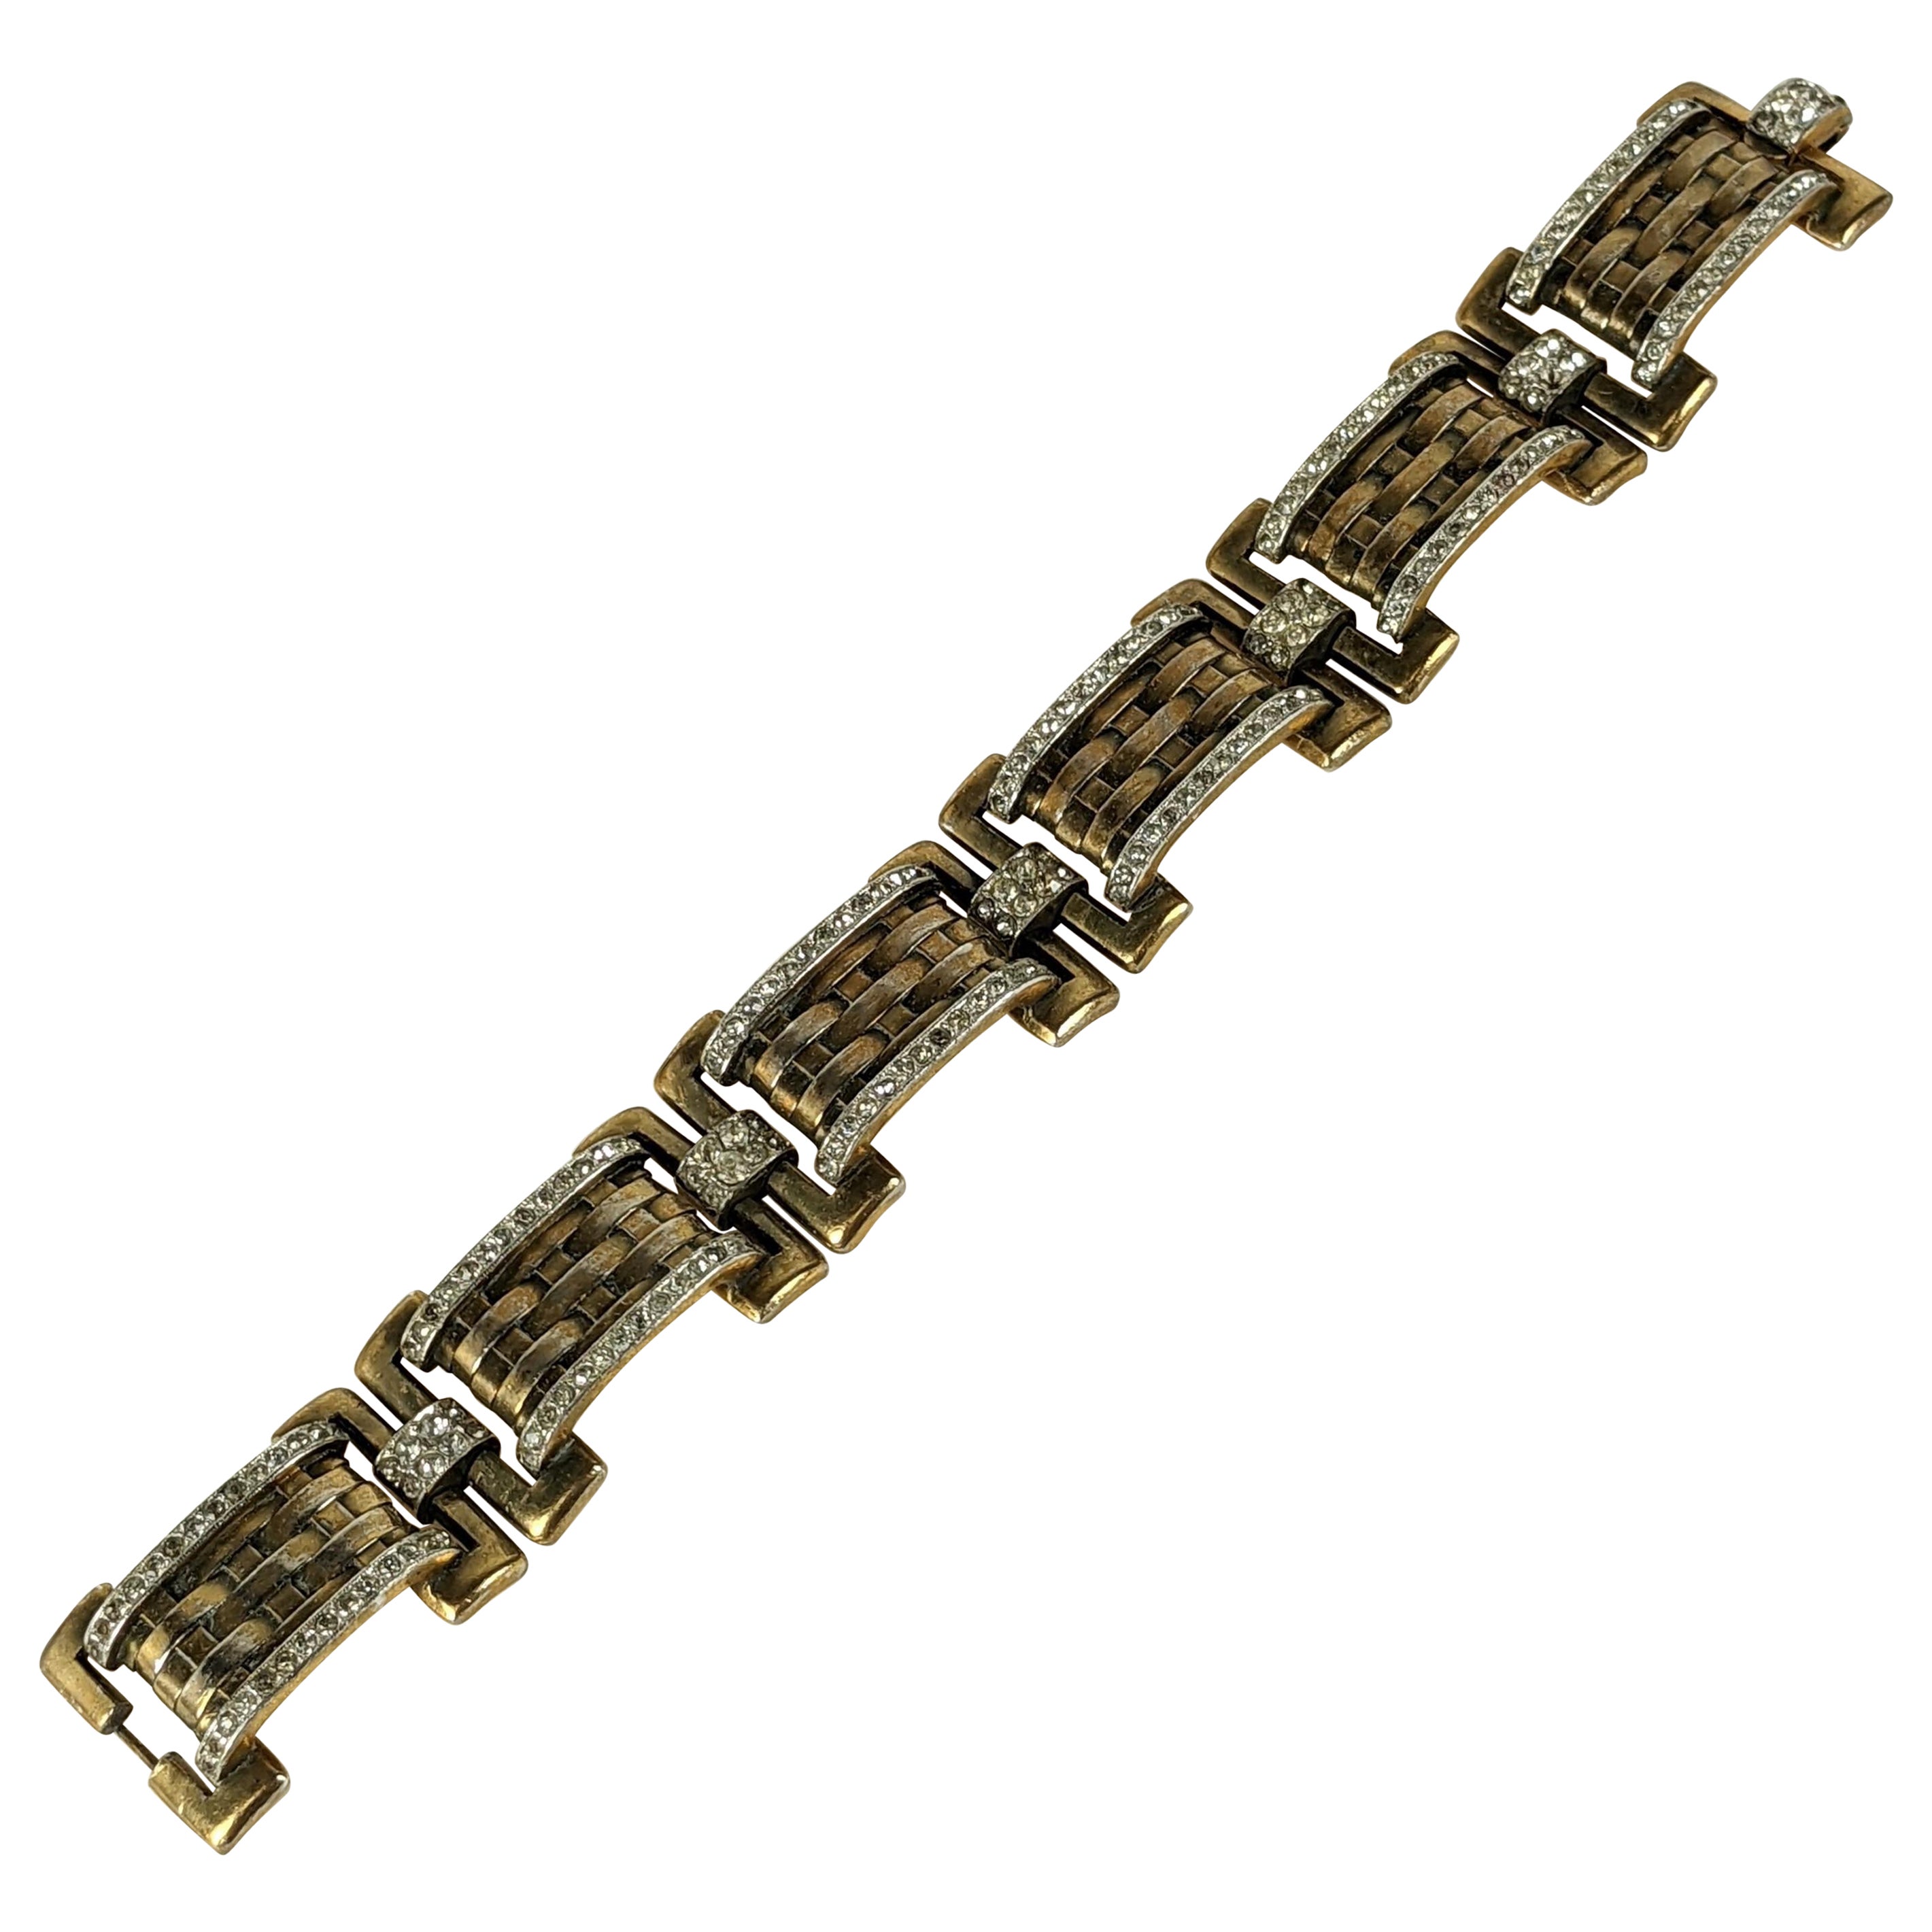 Trifari Green Gold Woven and Pave Link Bracelet